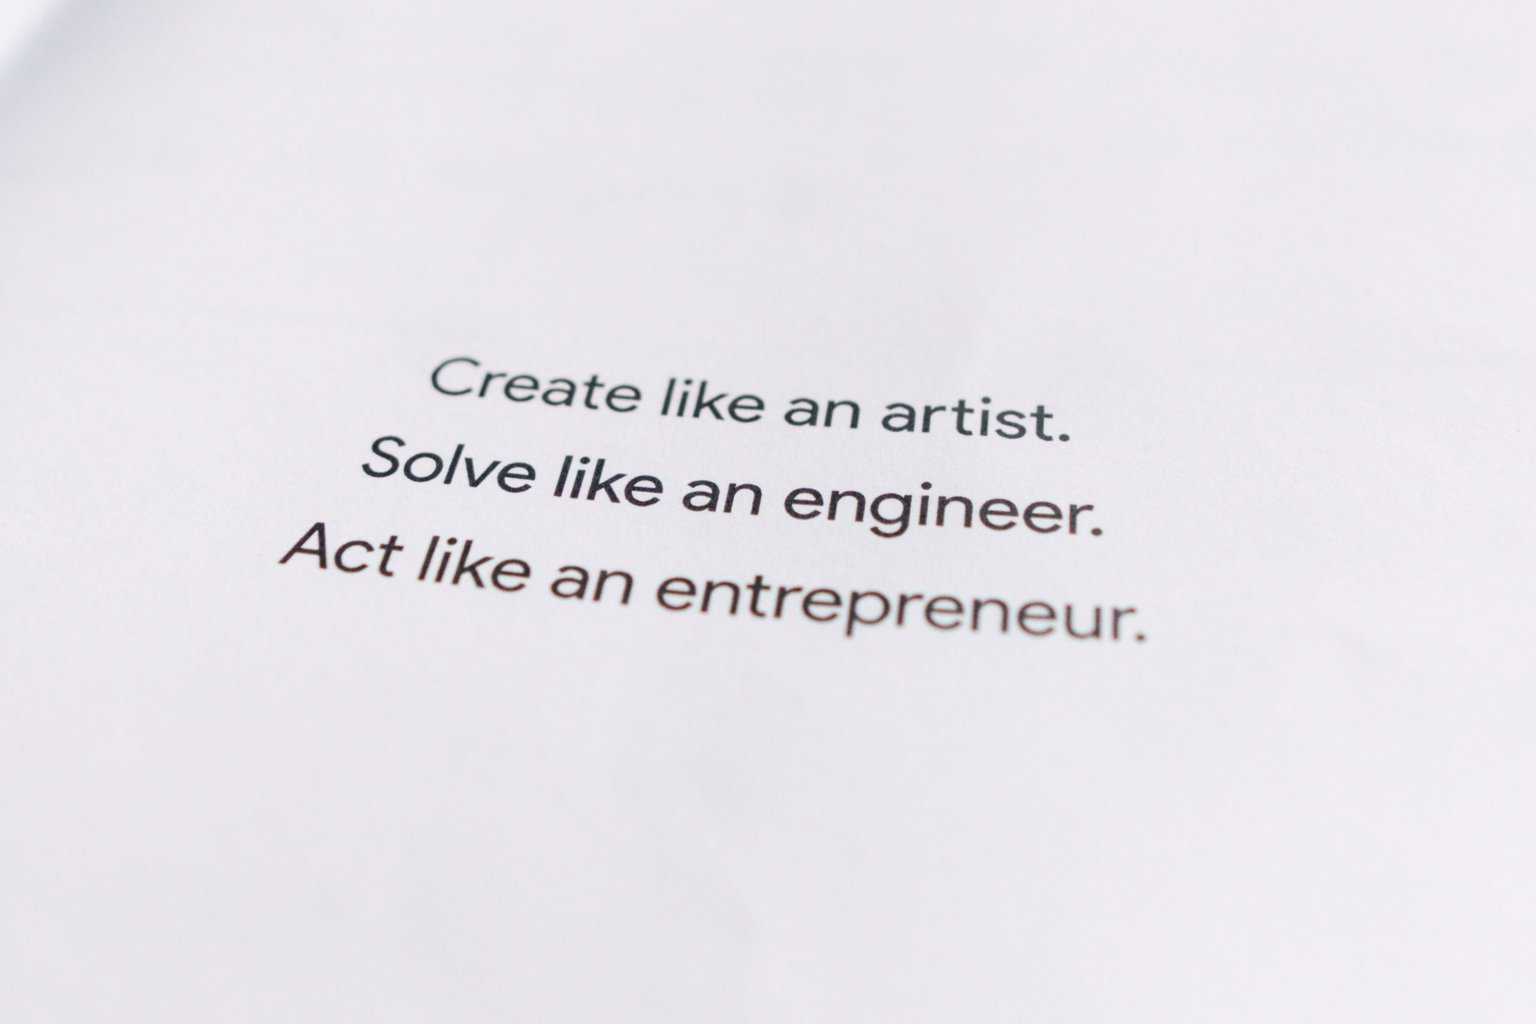 quote, credit, curated content, social media marketing